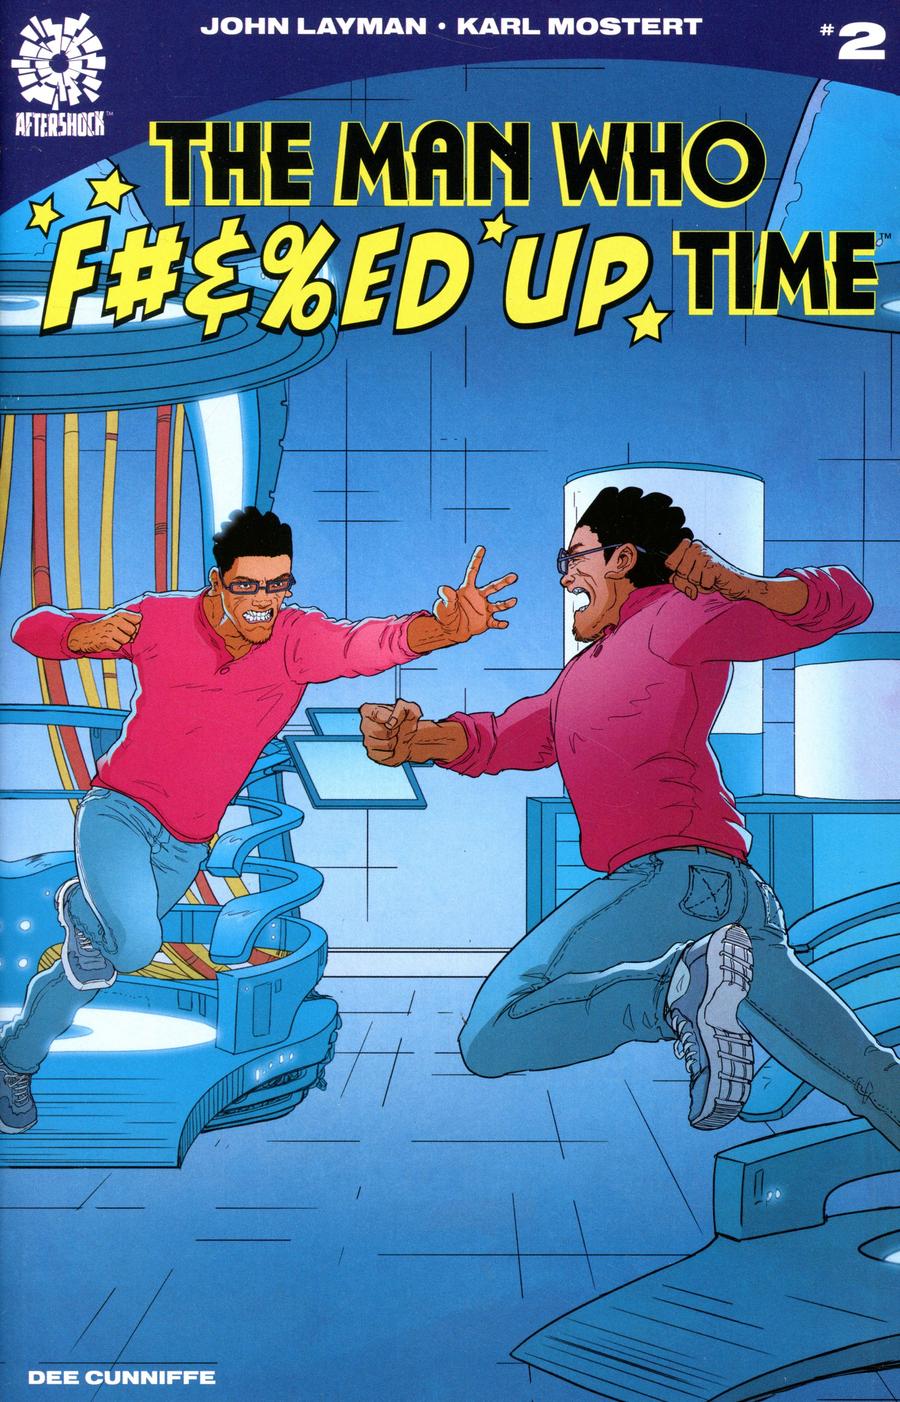 Man Who Effed Up Time #2 Cover A Regular Karl Mostert & Dee Cunniffe Cover